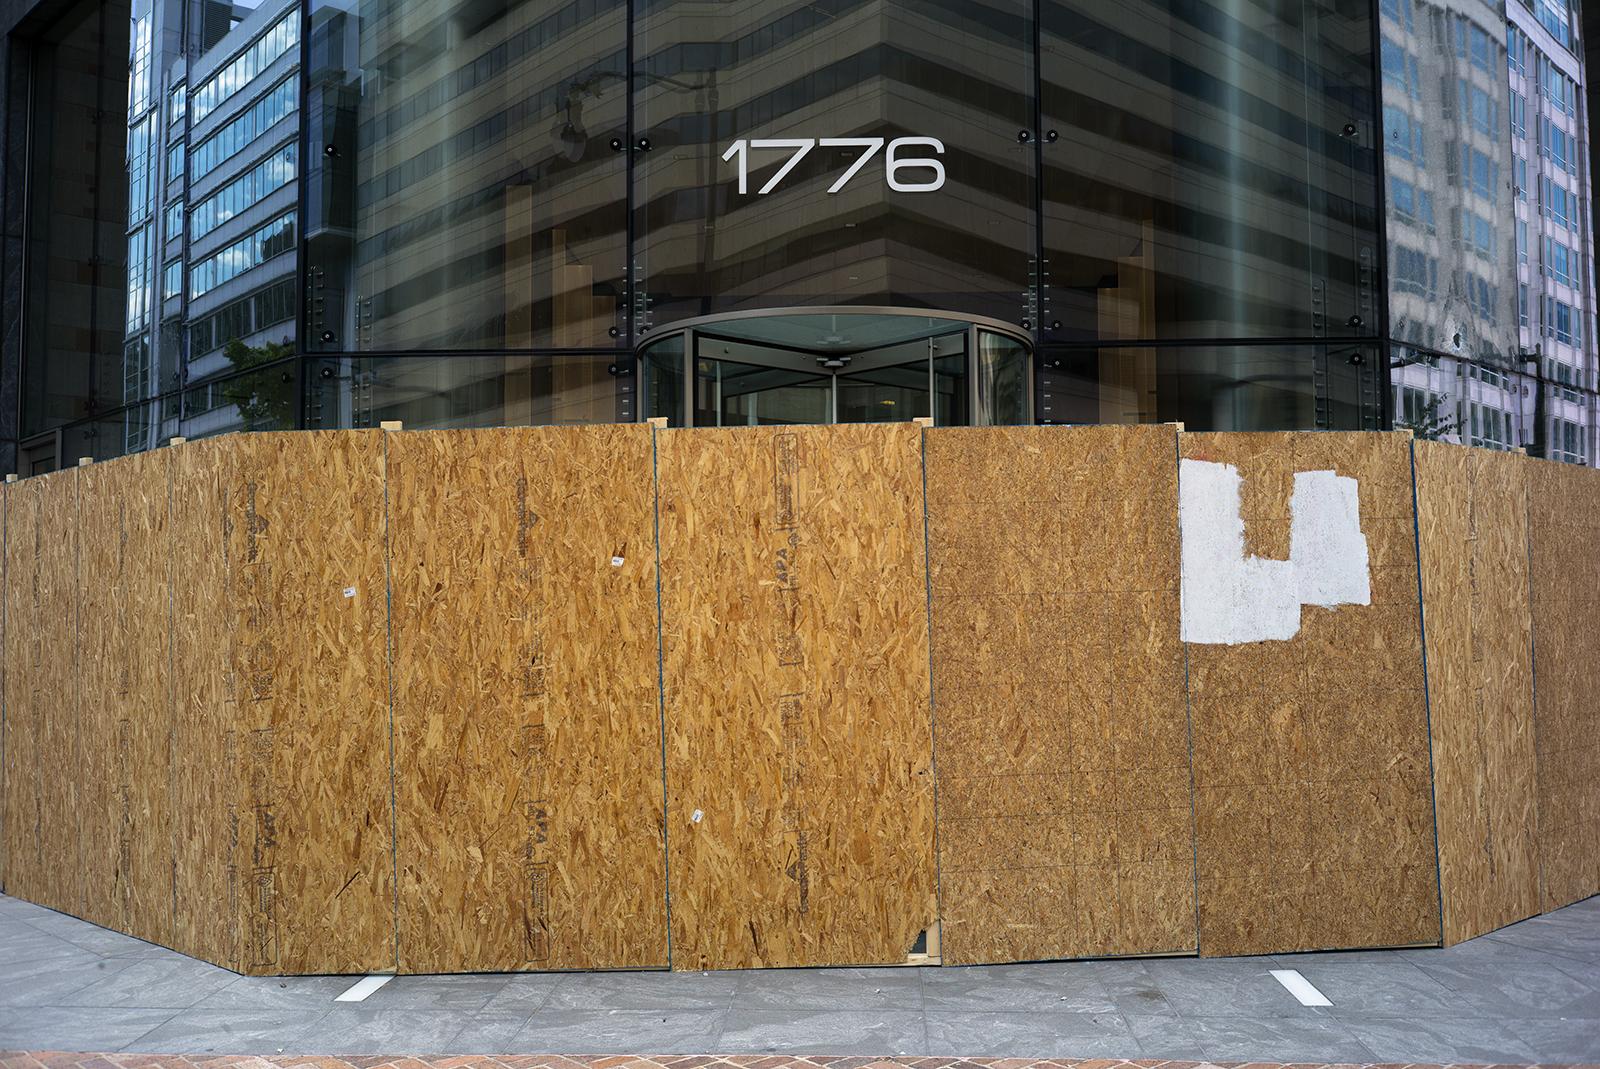 D.C Boarded Up - 